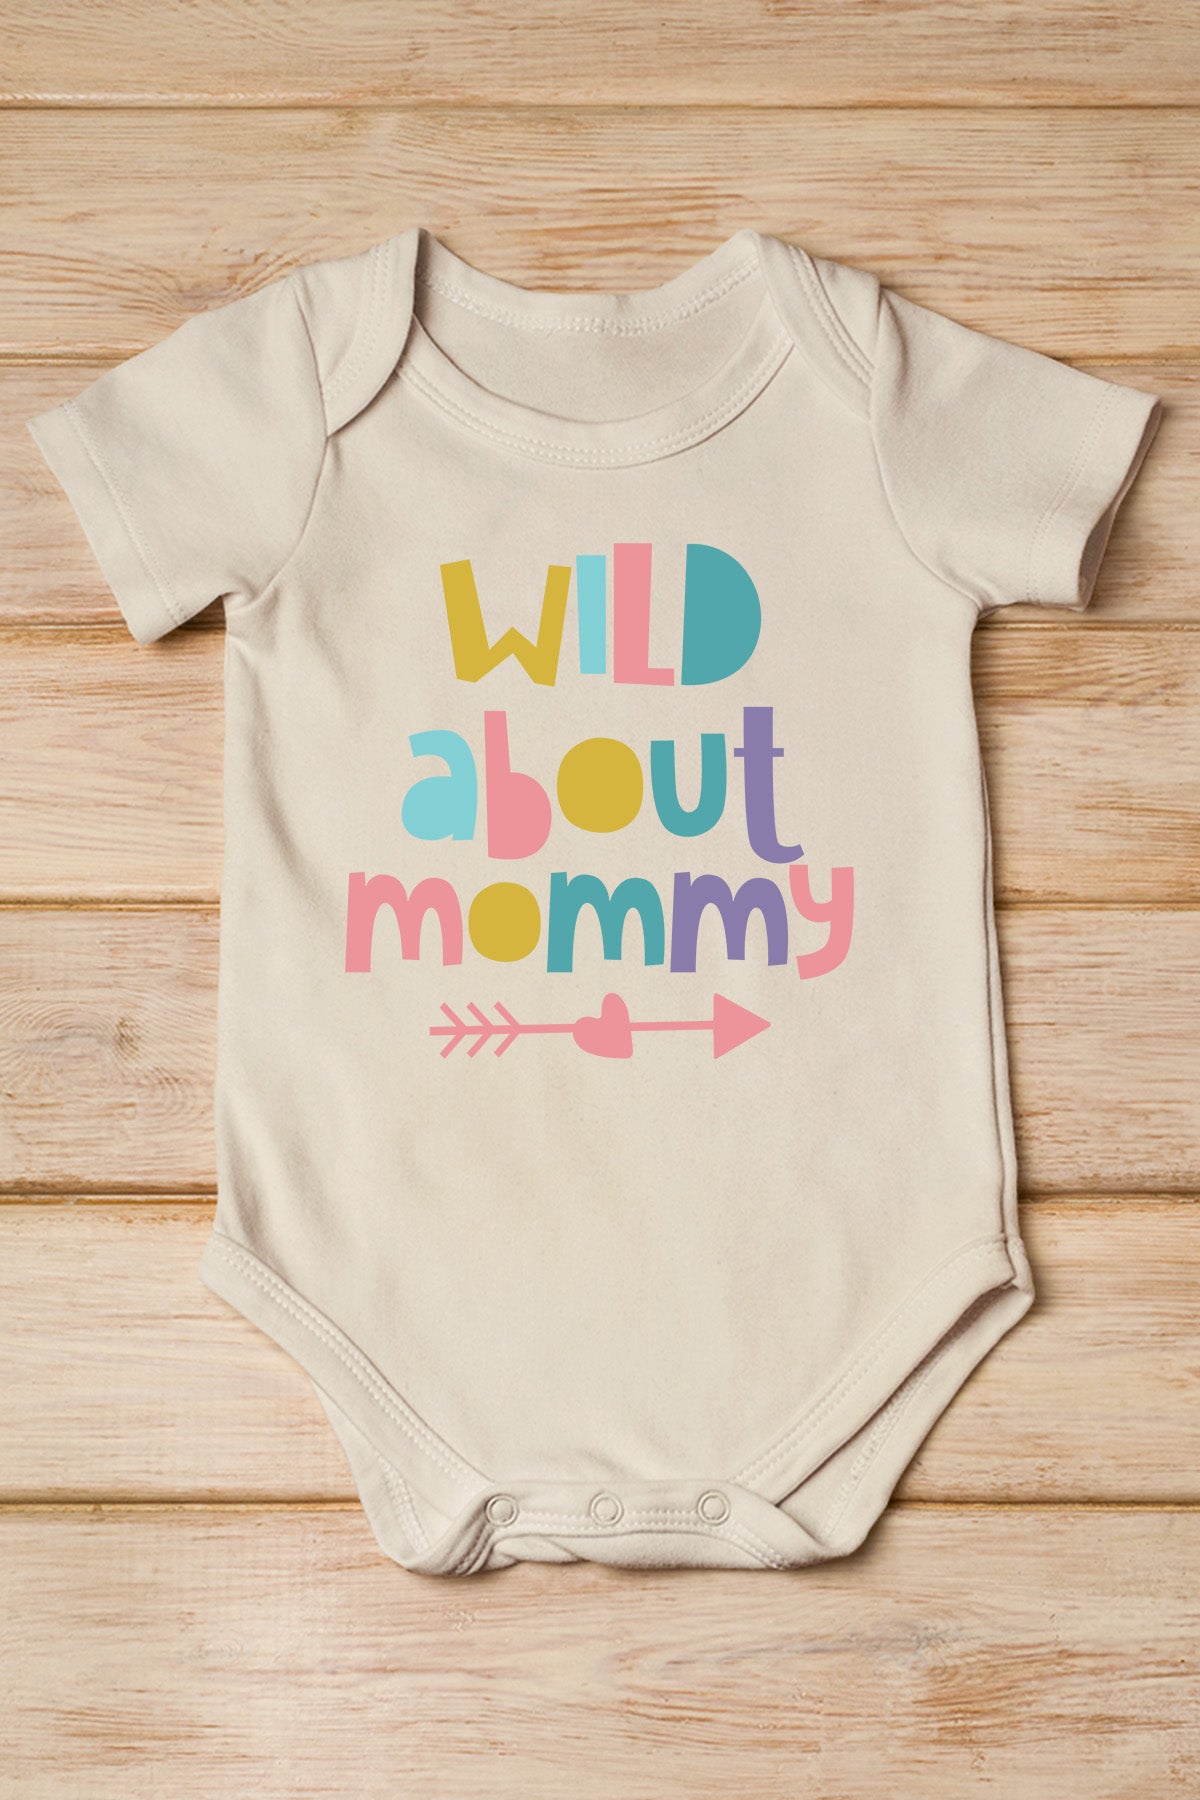 Wild About Mommy Baby Bodysuit